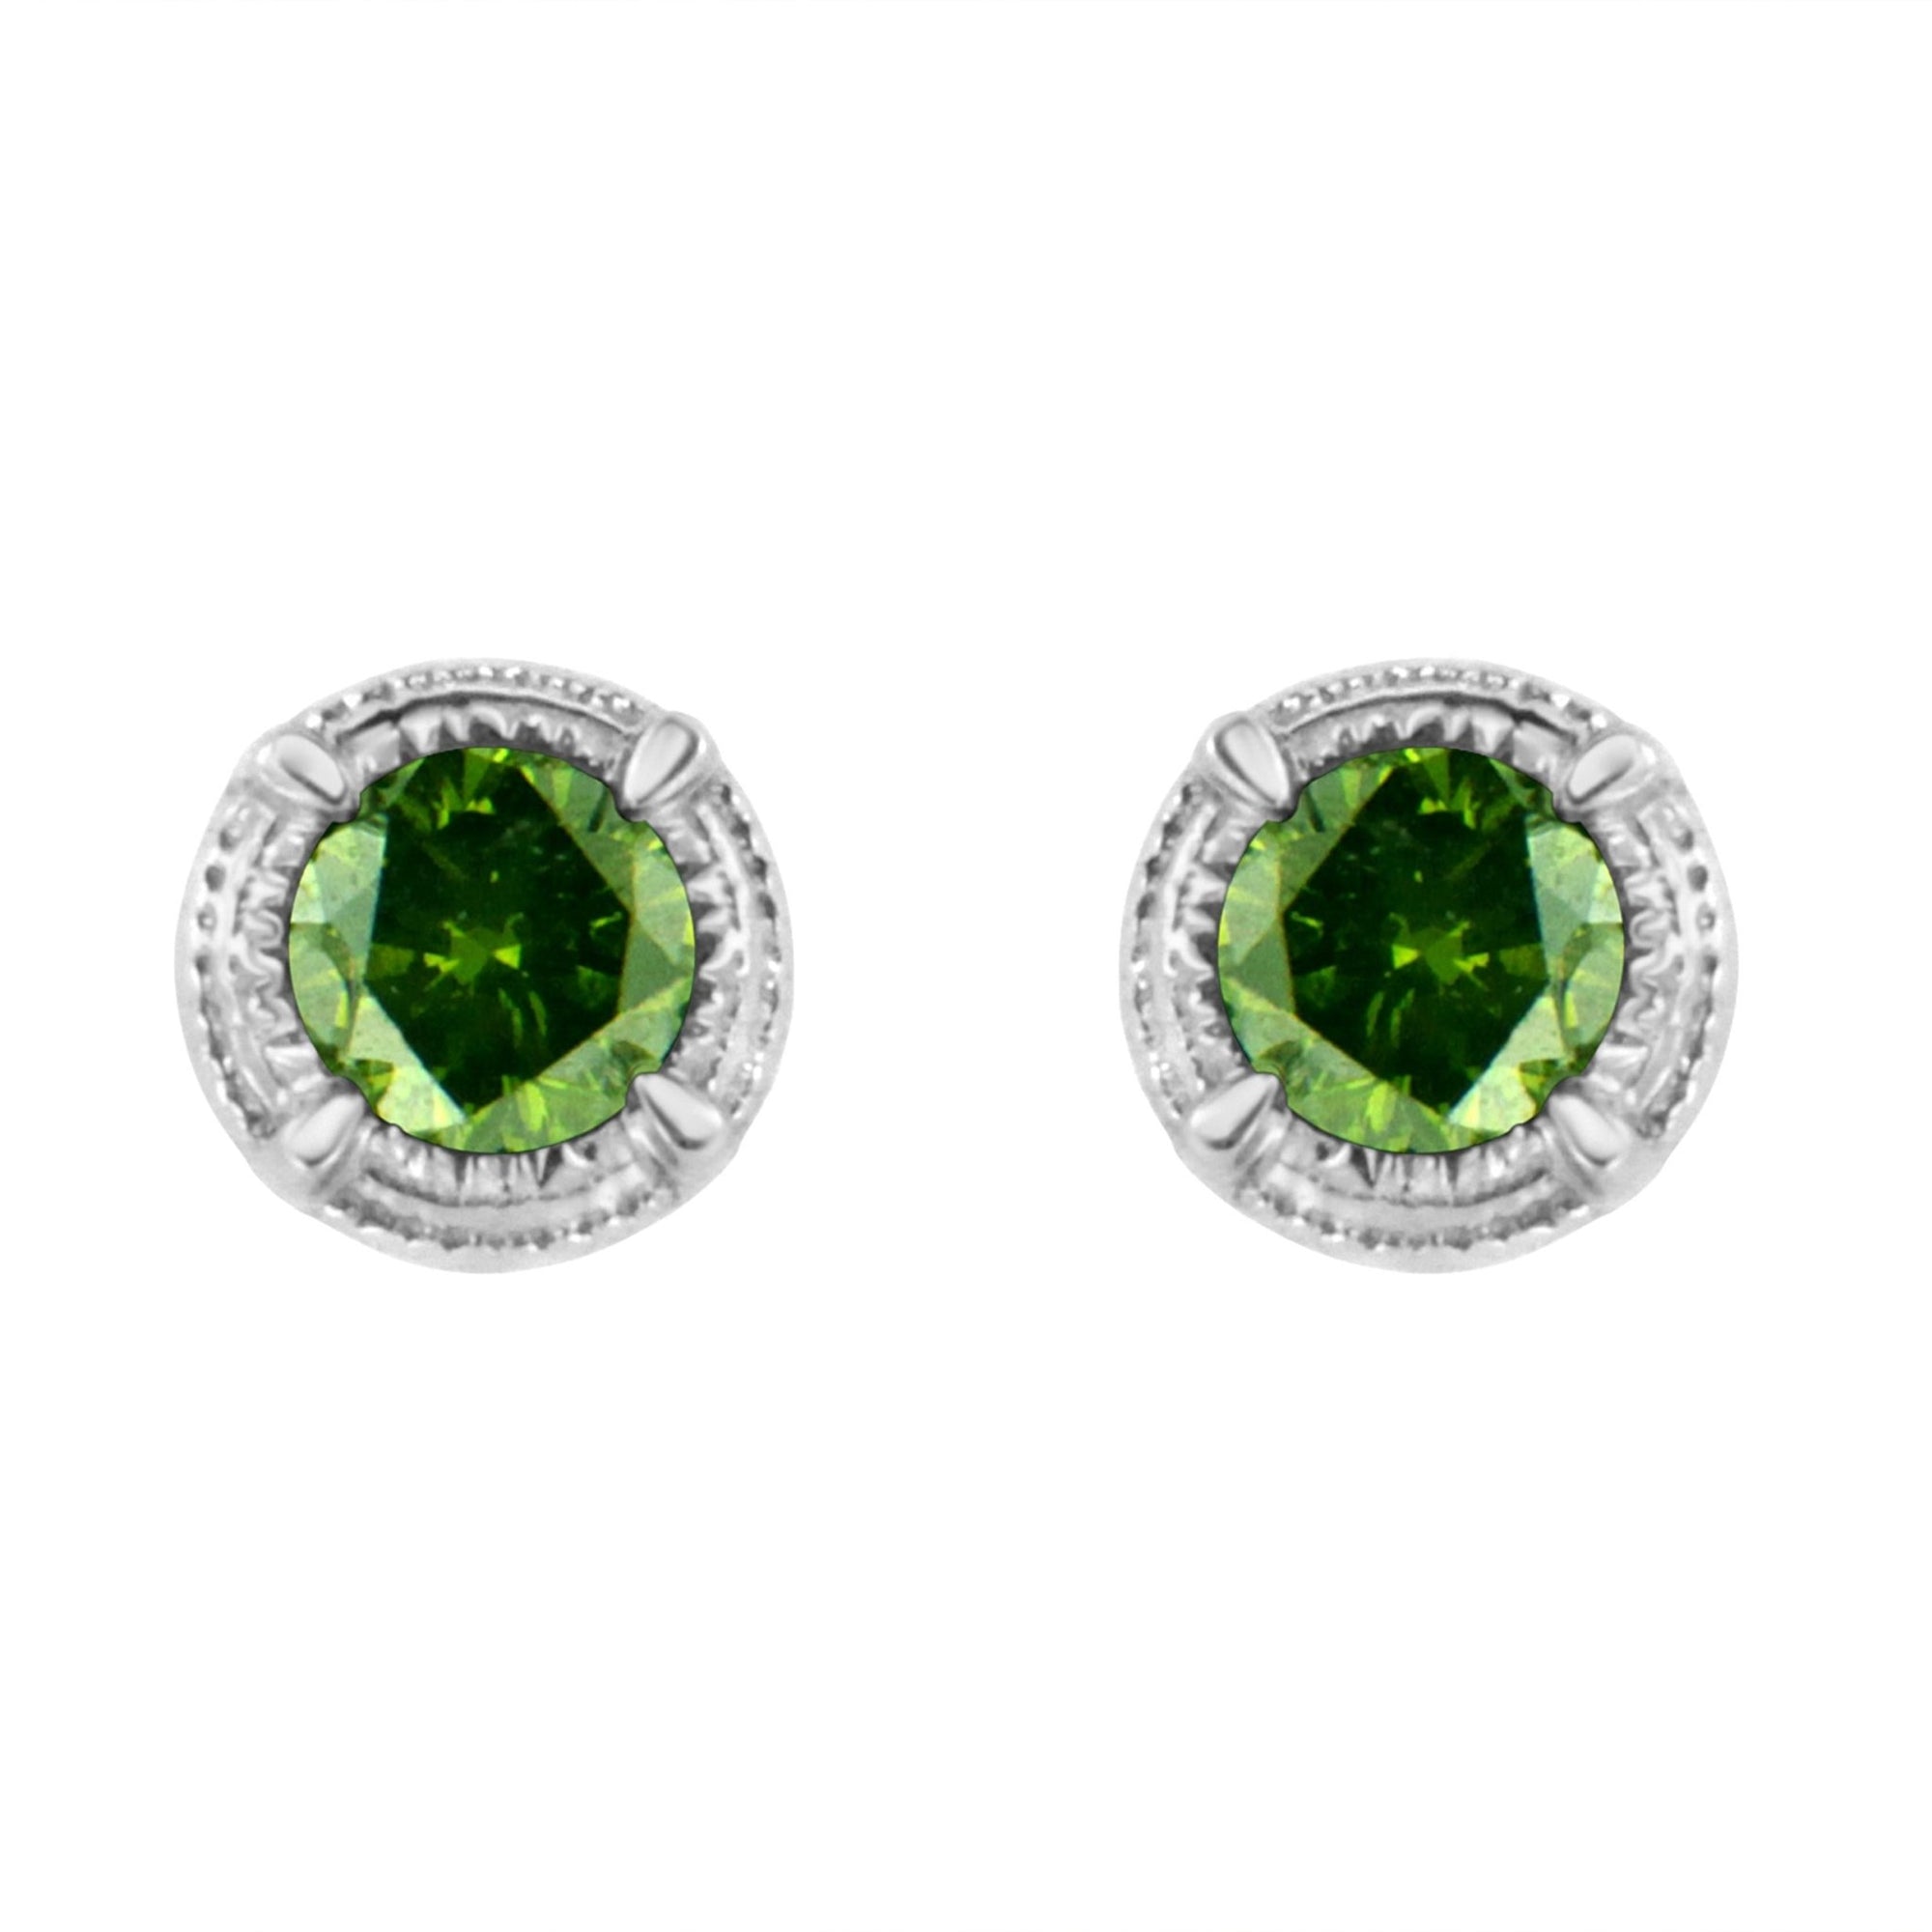 .925 Sterling Silver 1/4 cttw Treated Green Diamond Modern 4-Prong Solitaire Milgrain Stud Earrings (Green Color, I1-I2 Clarity) - LinkagejewelrydesignLinkagejewelrydesign